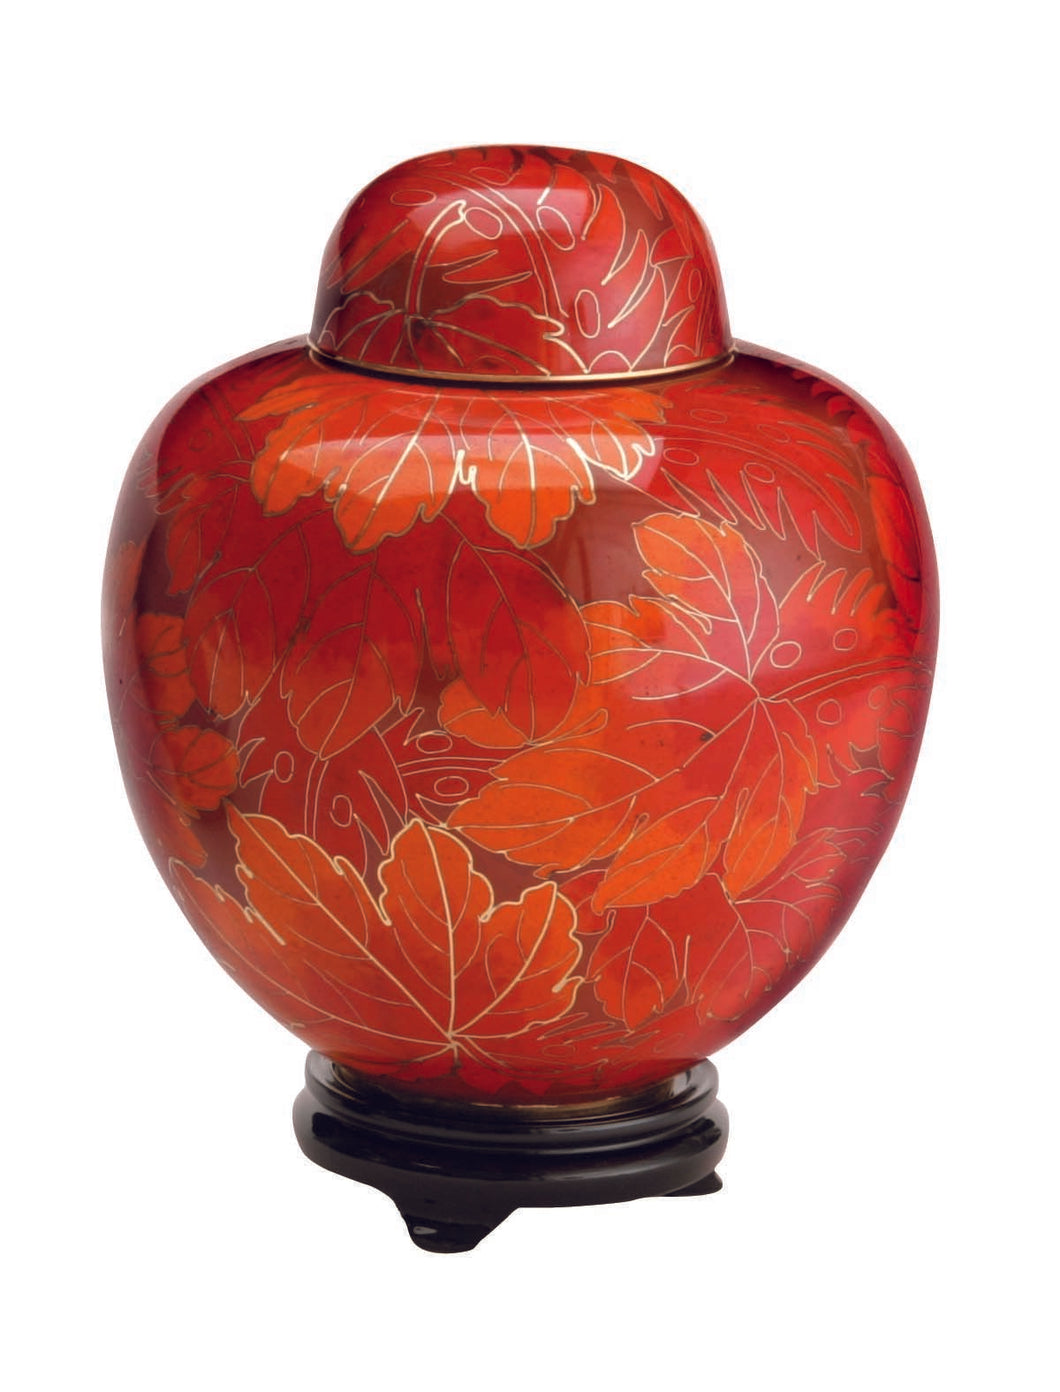 Large/Adult 210 Cubic Inches Fall Leaf Cloisonne Funeral Cremation Urn for Ashes